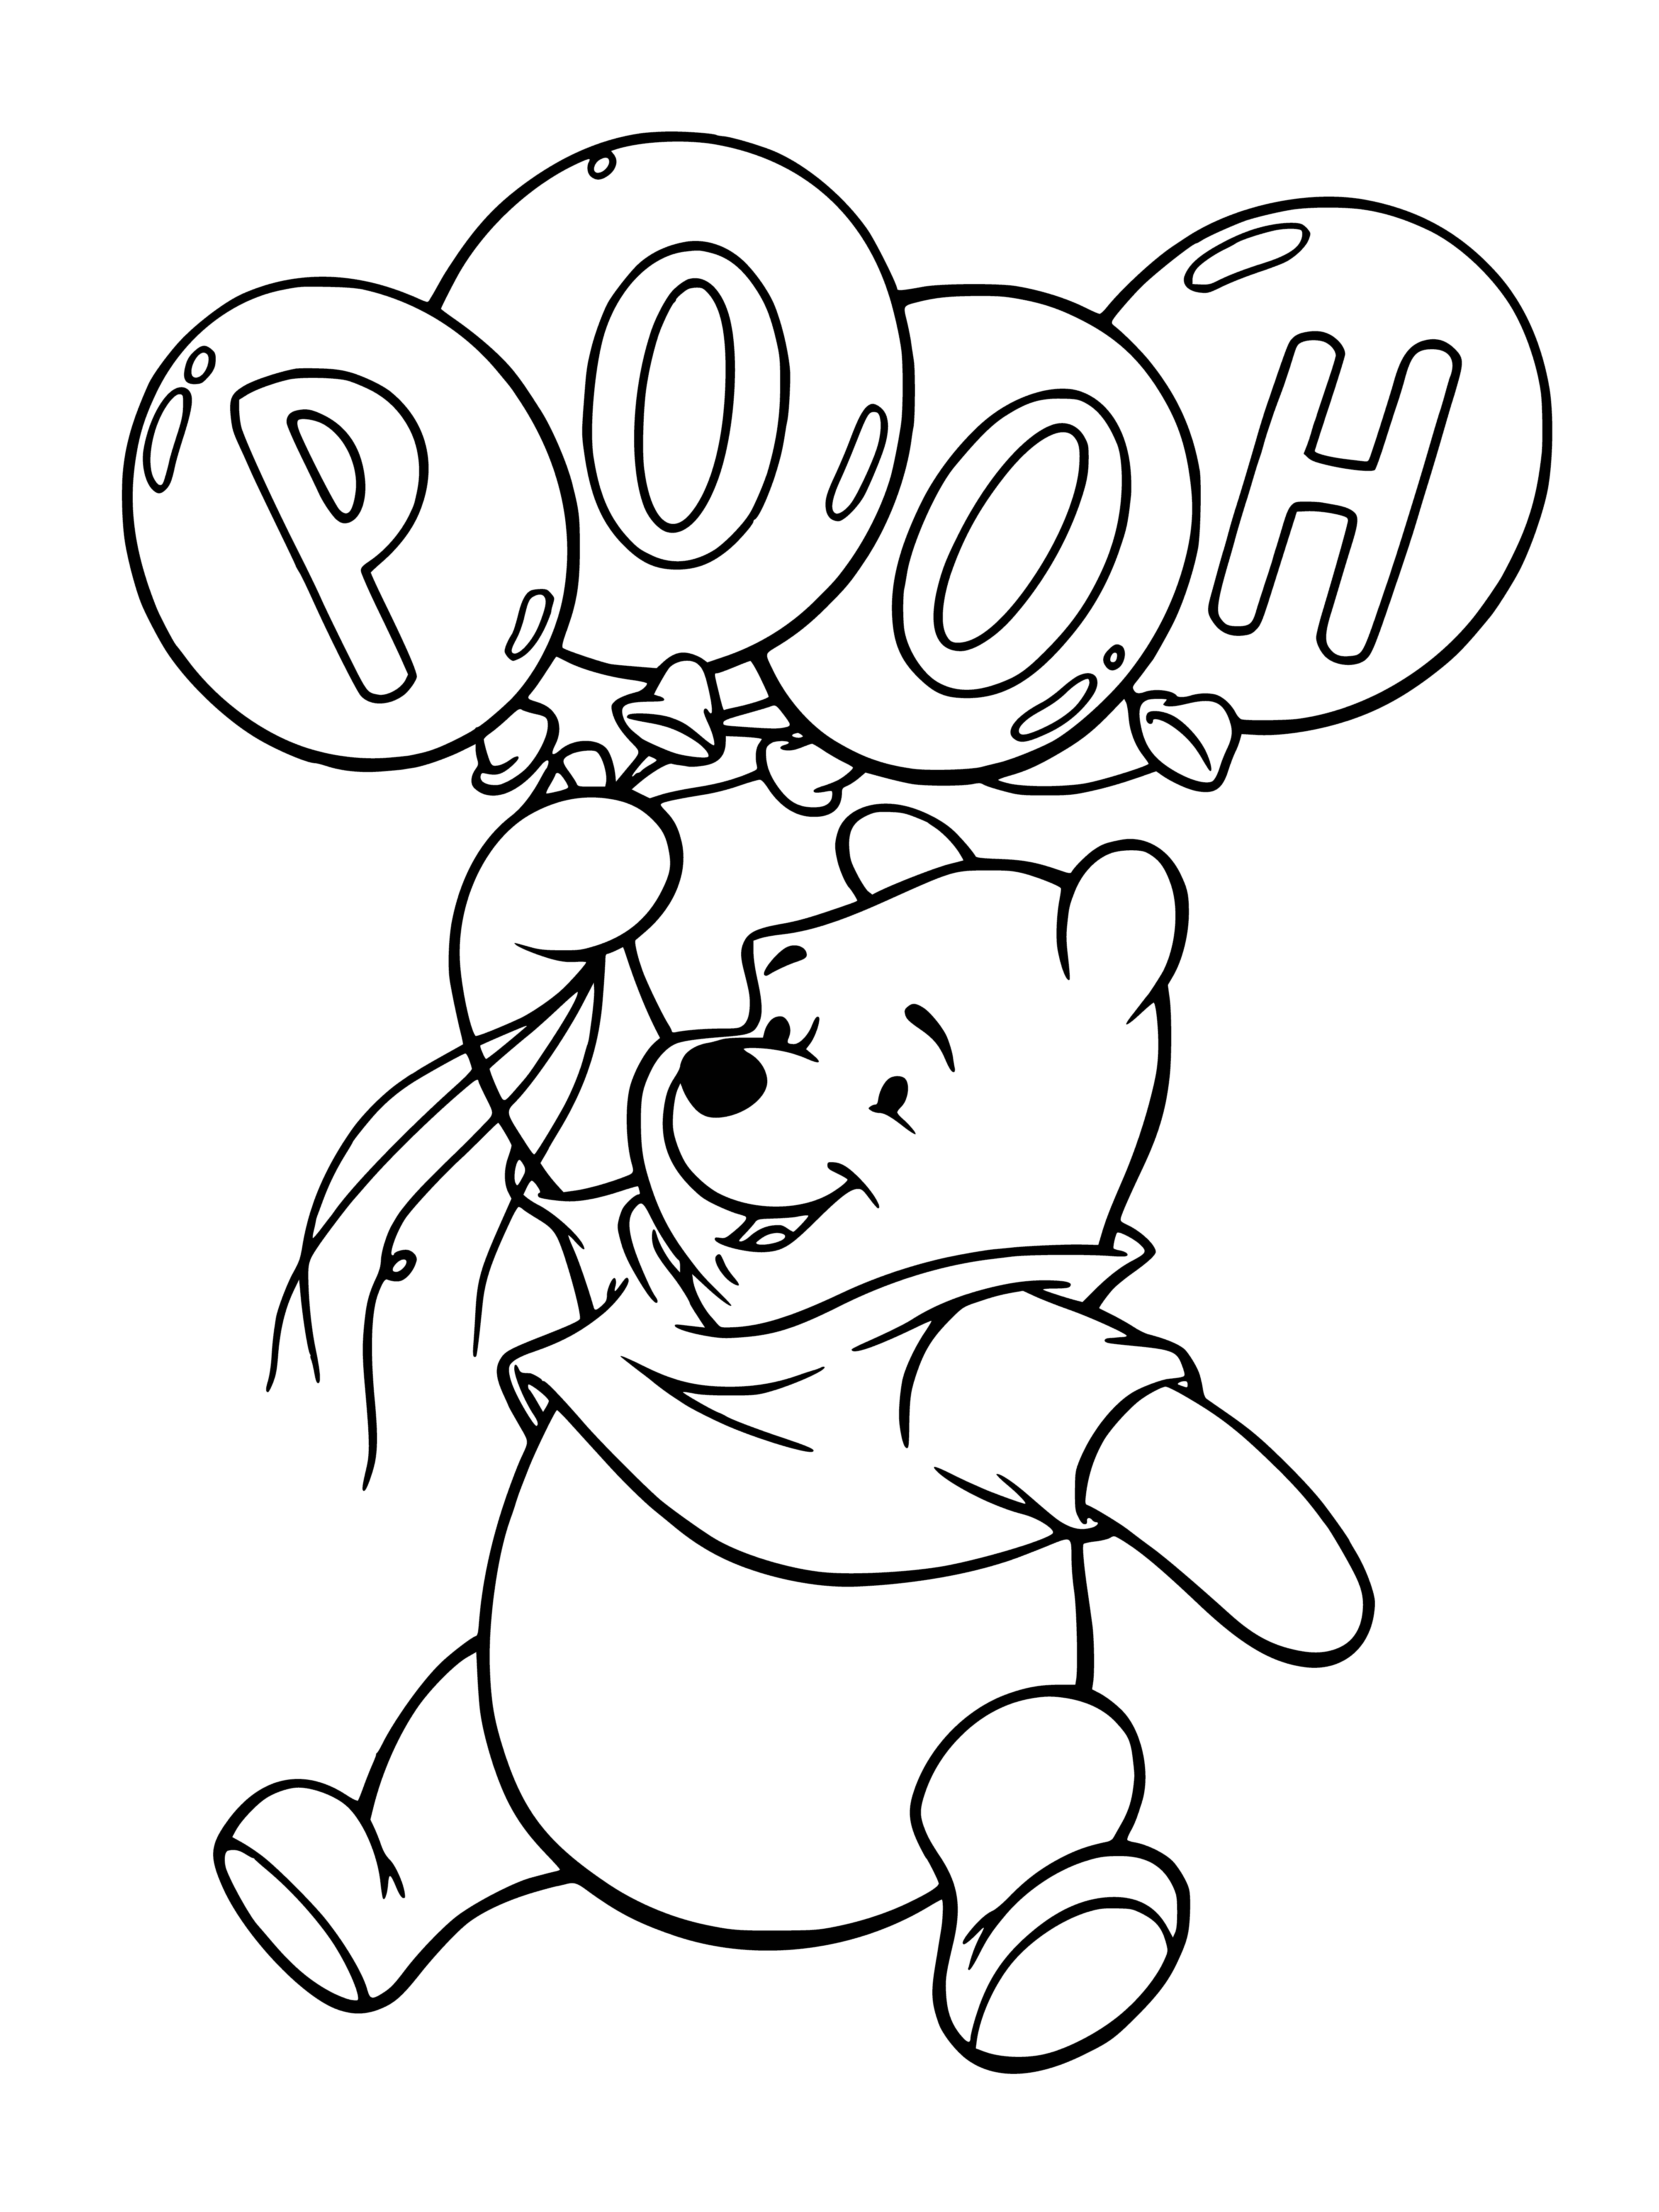 coloring page: Winnie the Pooh holds onto a string of a brightly colored helium balloon as others around him float away.